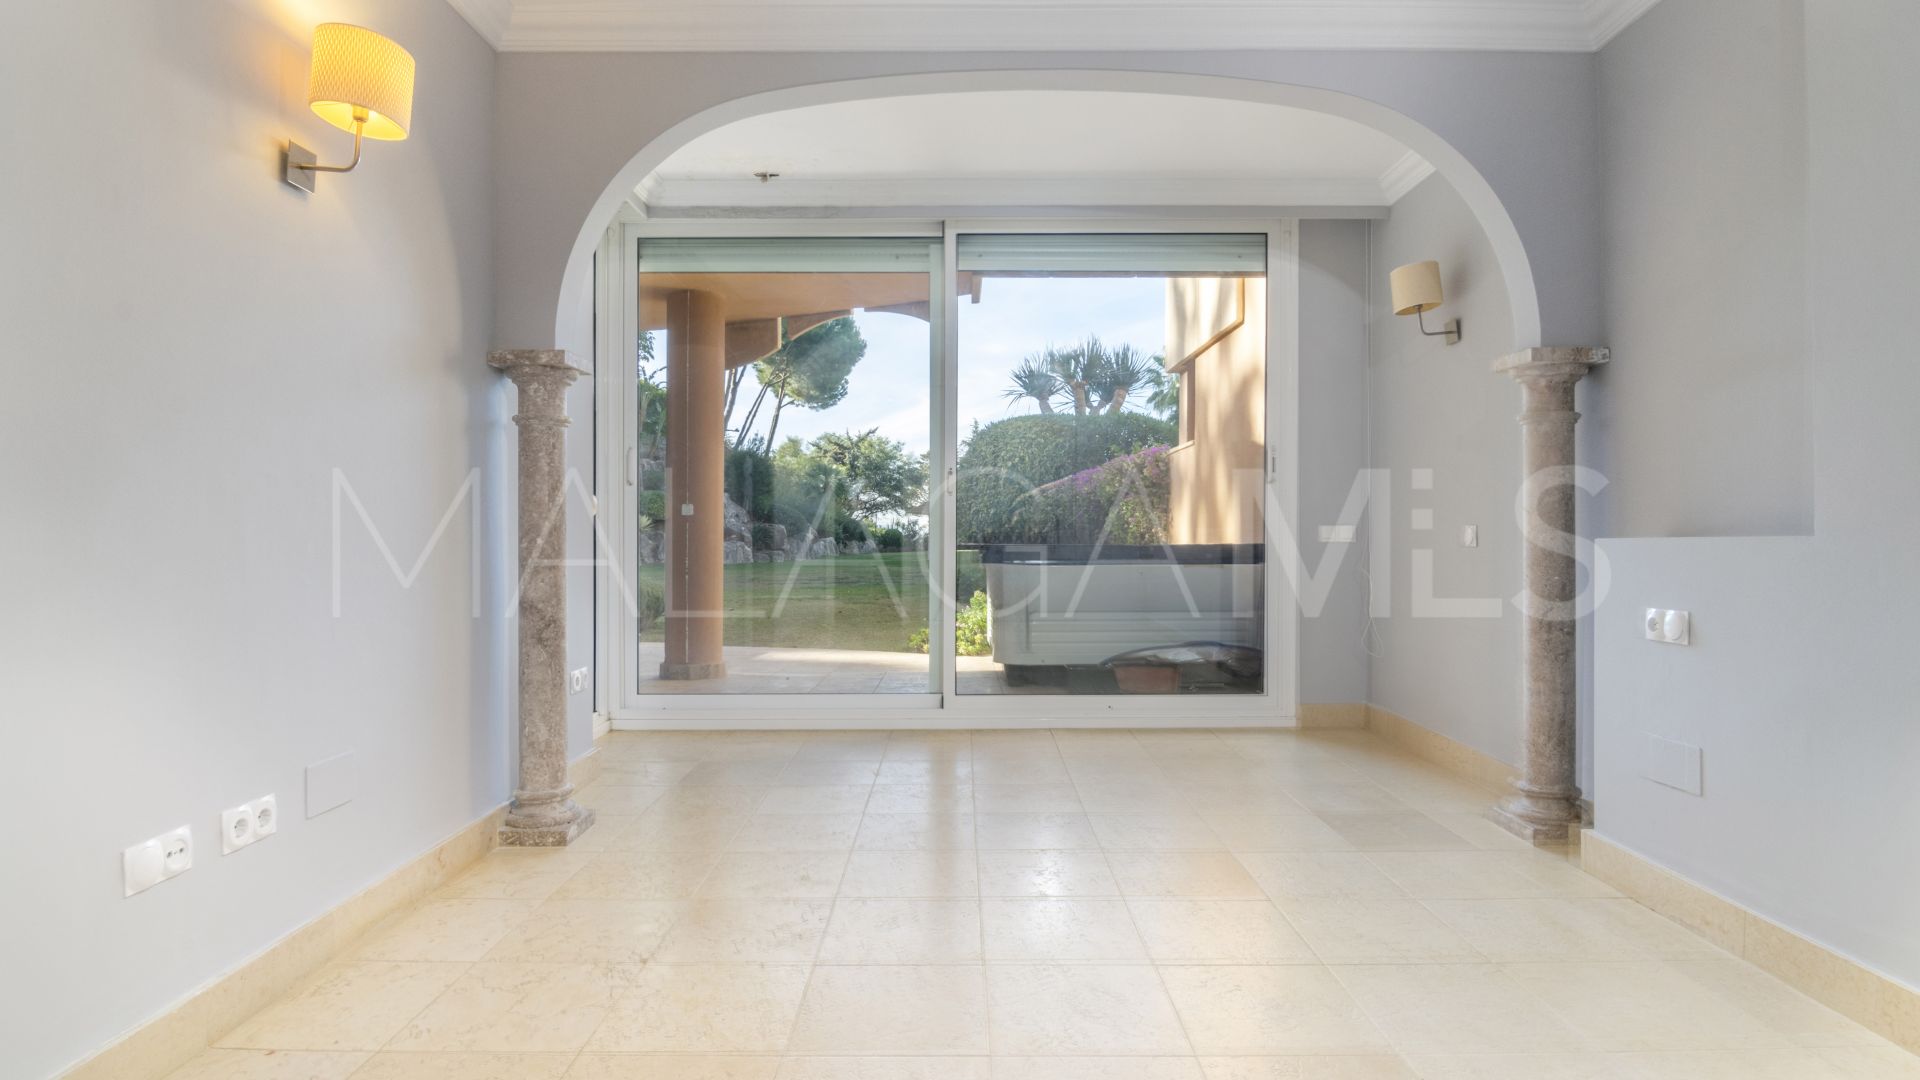 Buy Magna Marbella ground floor apartment with 2 bedrooms